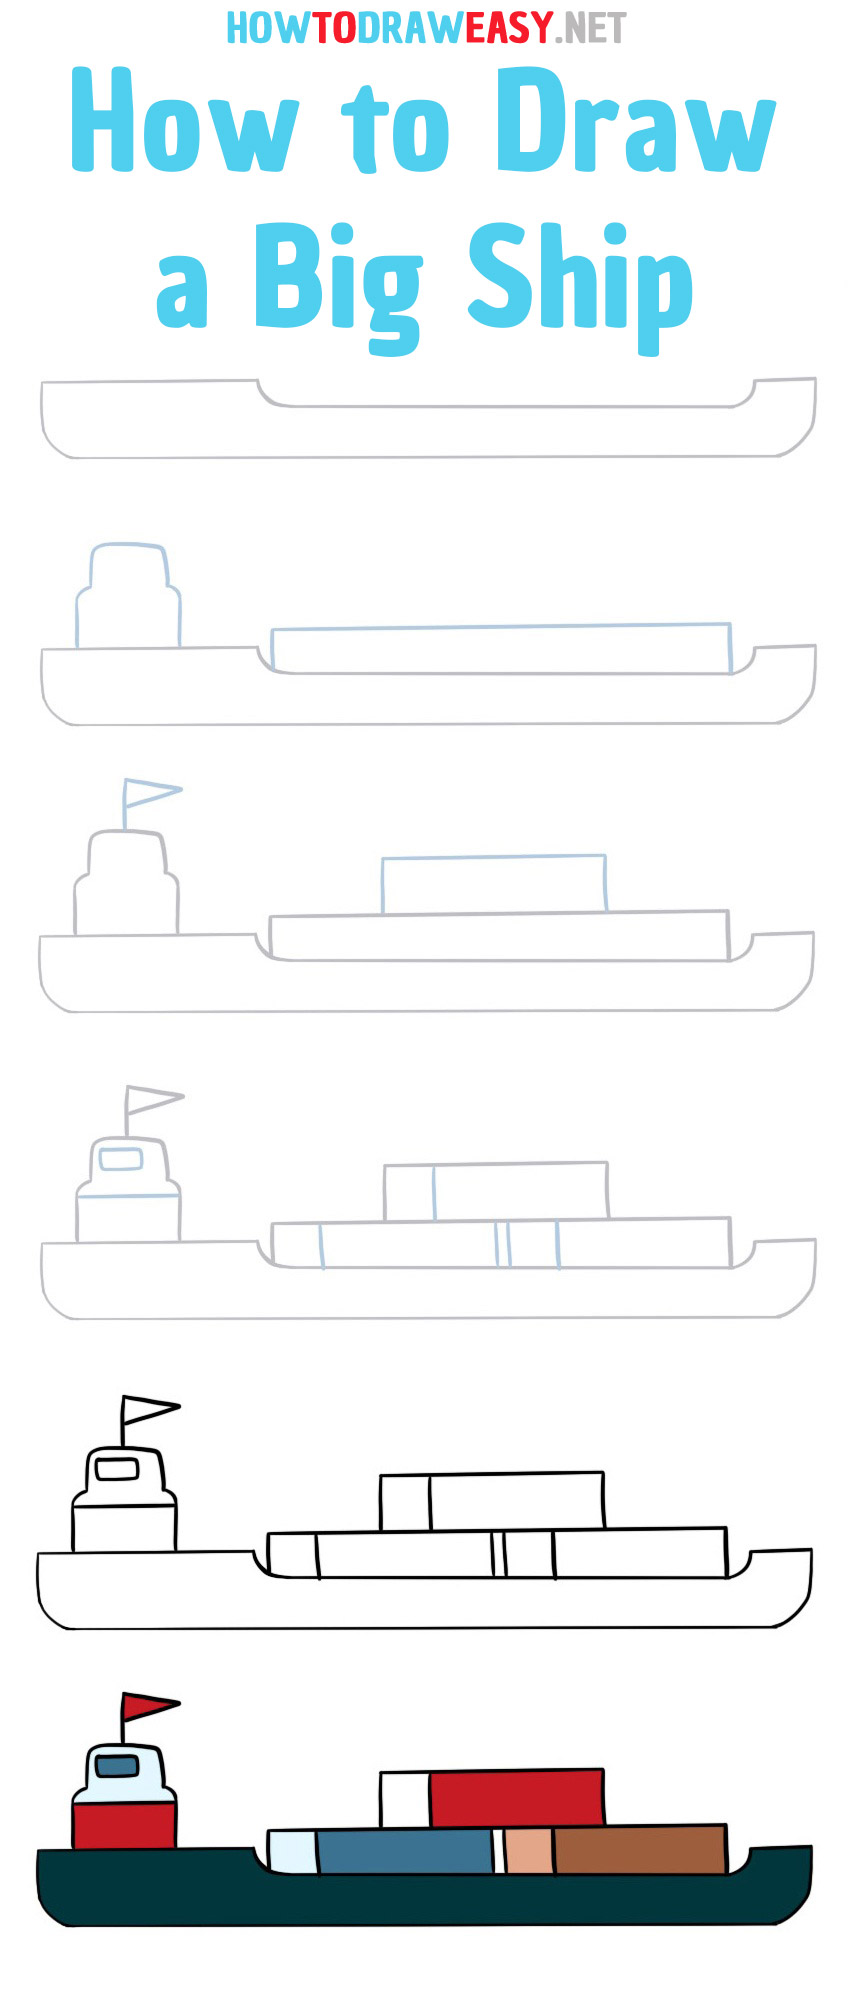 How to Draw a BIg Ship step by step